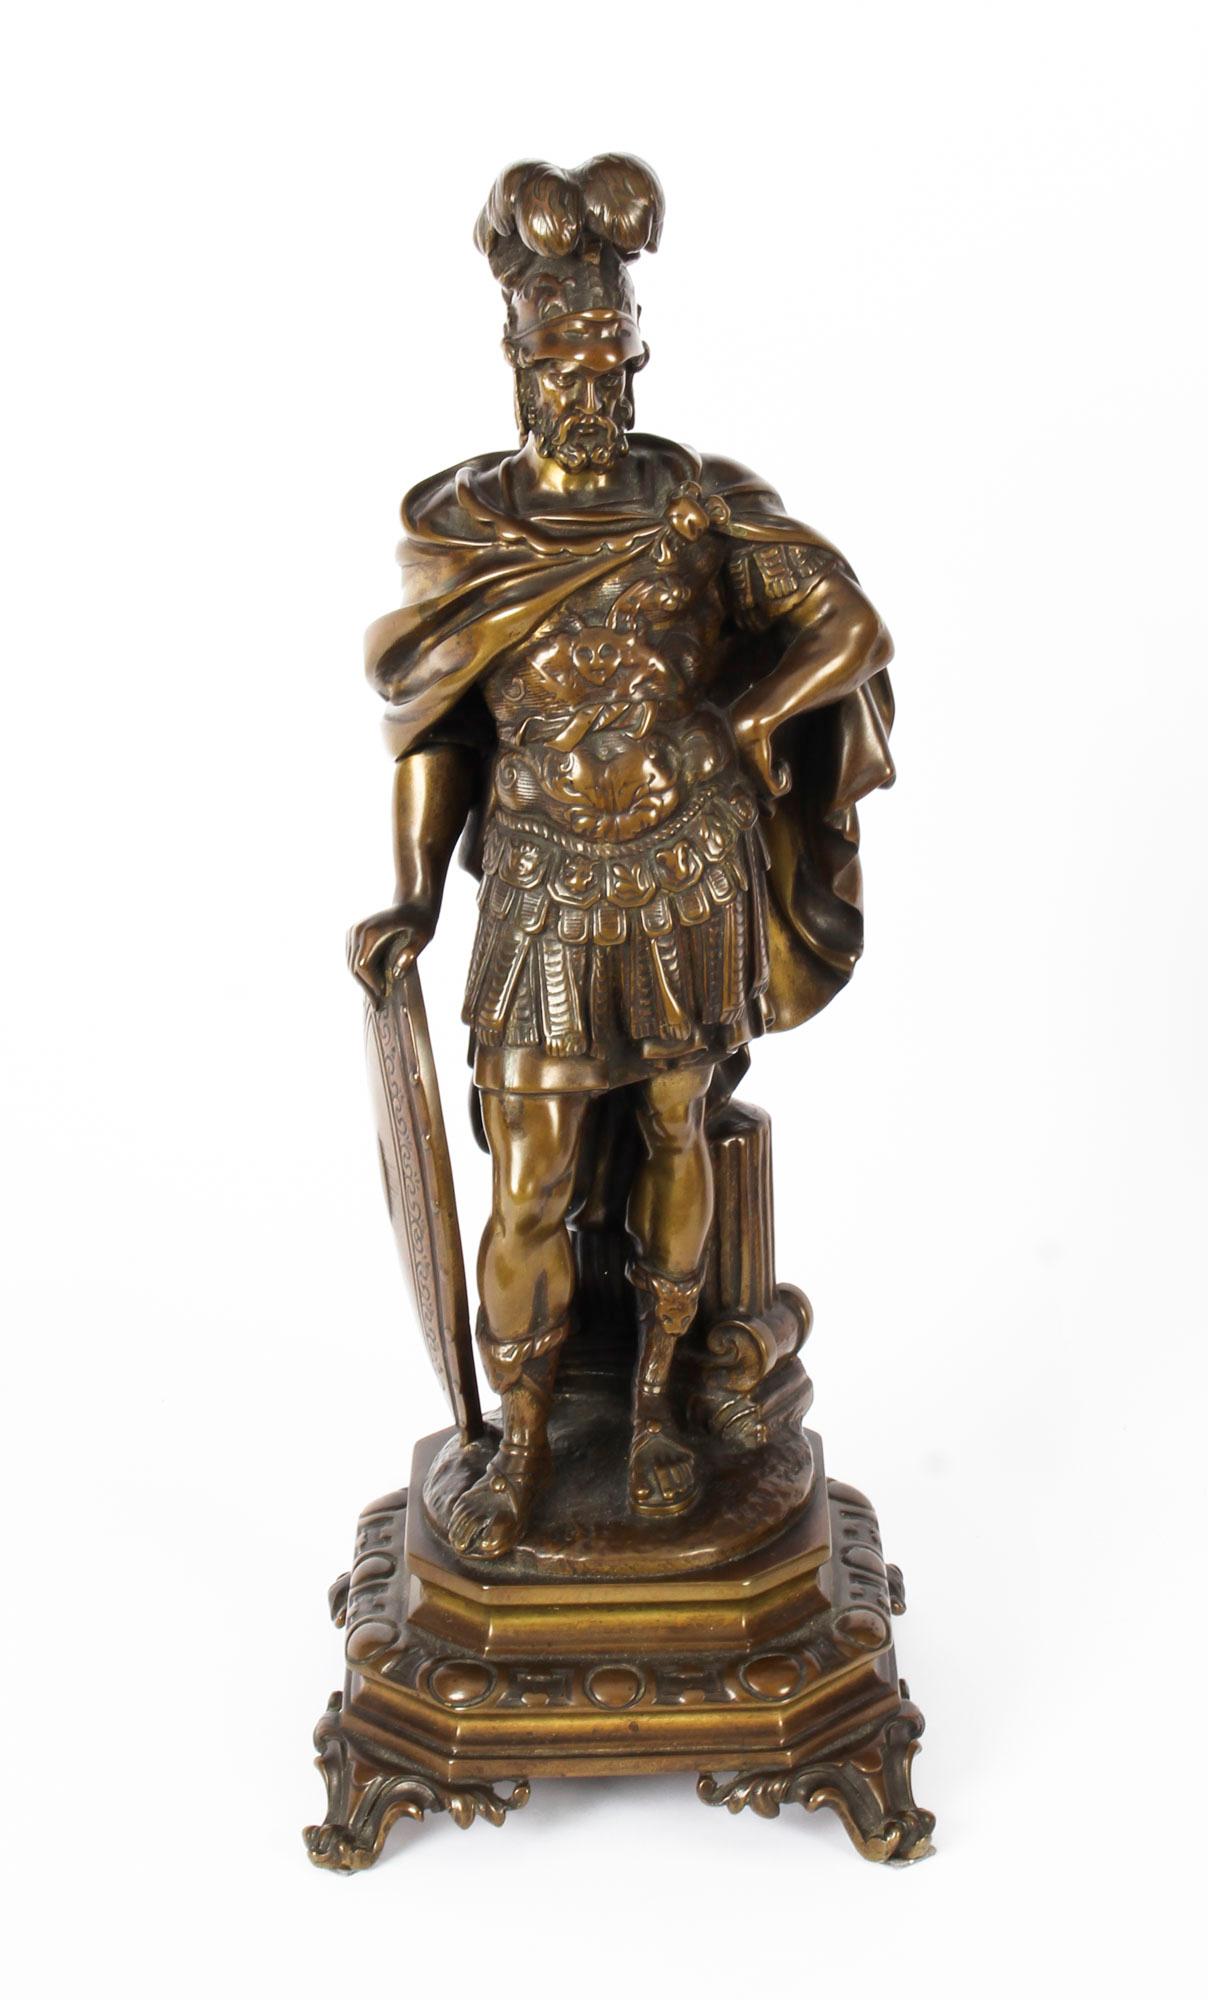 This is a truly stunning antique pair of French patinated-bronze sculptures of Mars and Minerva, dating from circa 1850 in date.
Mars is dressed in his engraved battle armour holding a shield and Minerva is dressed in similar fashion with a shield